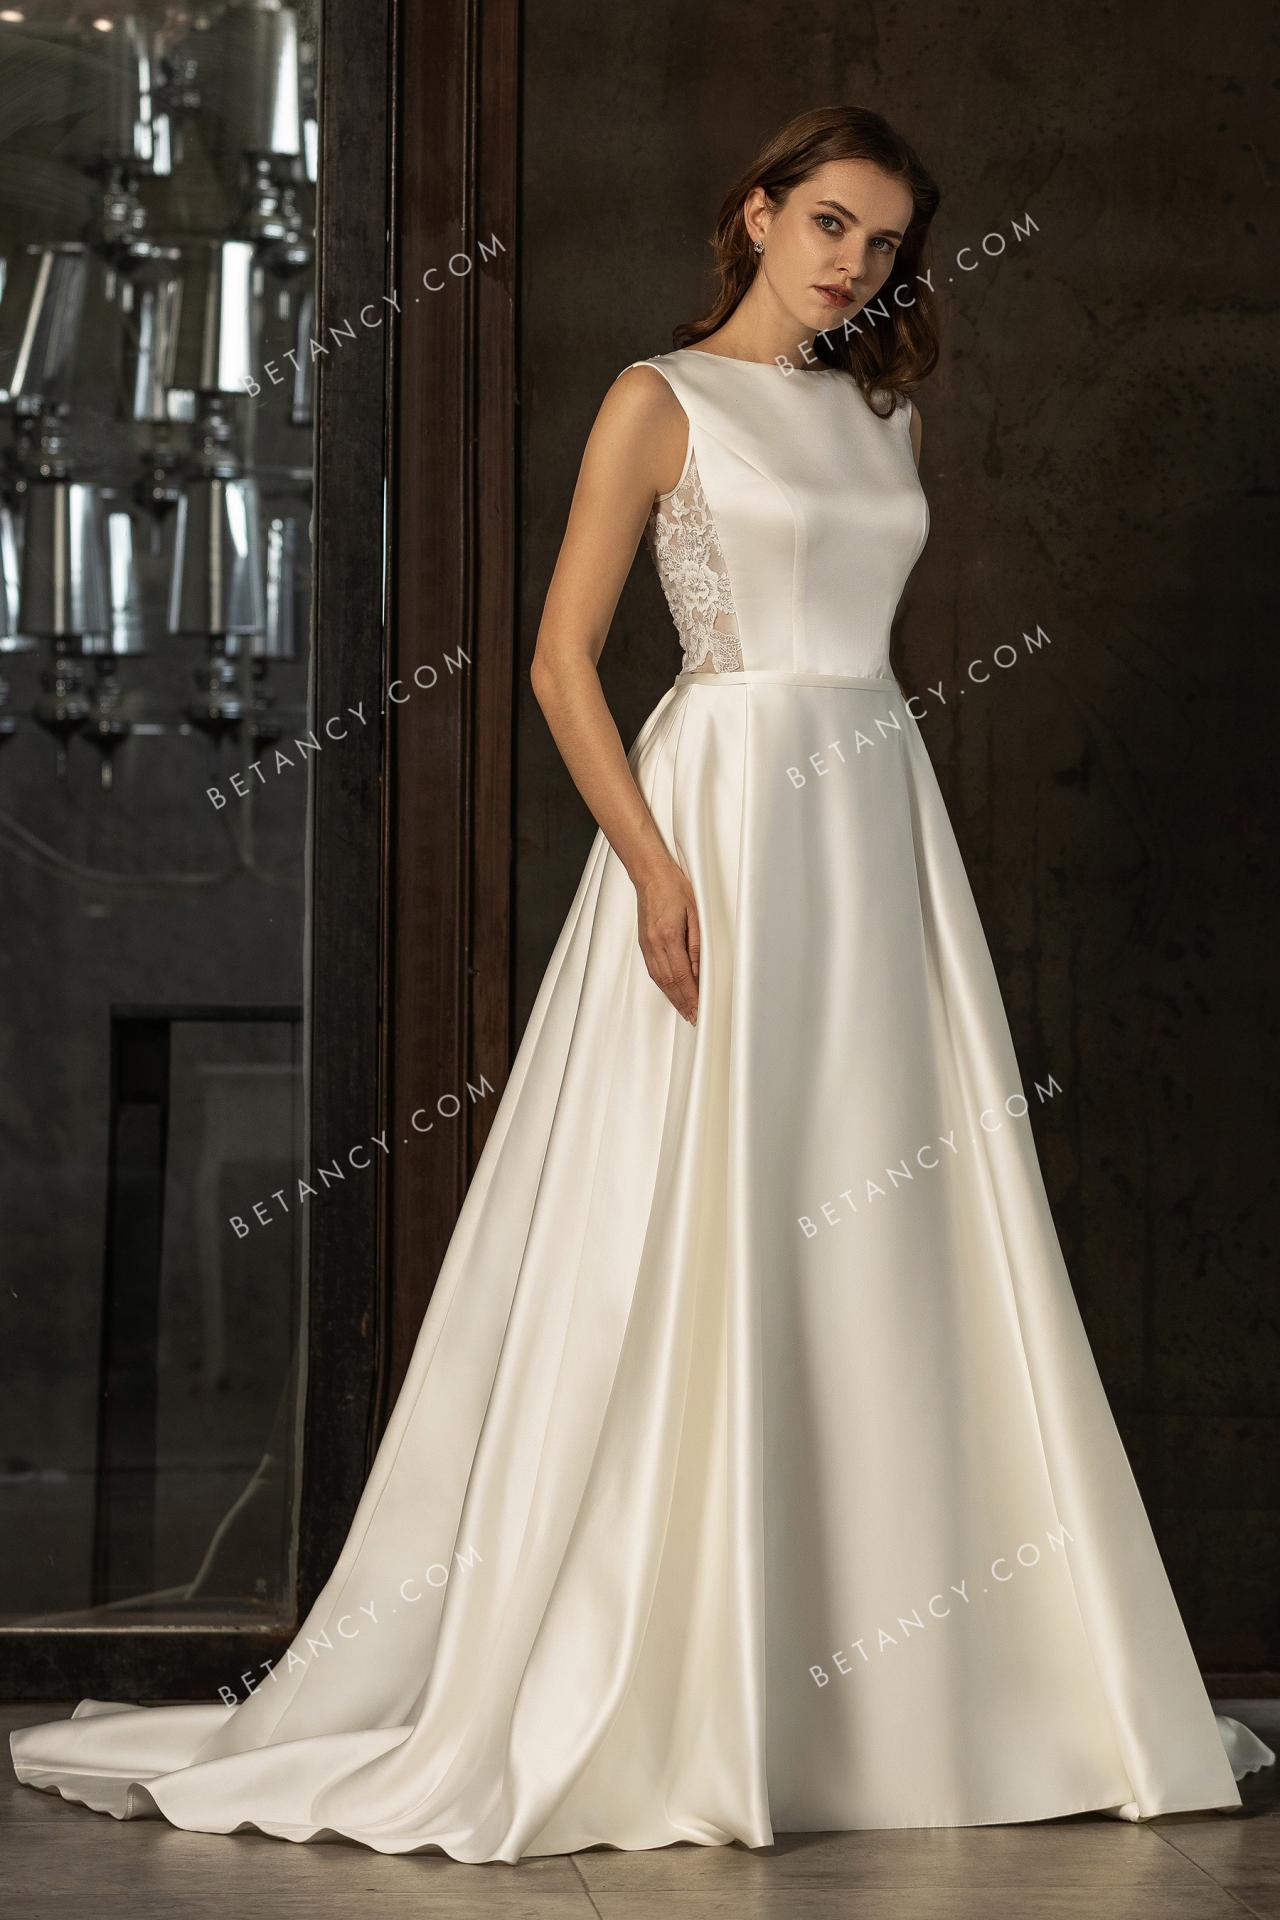 High end satin in pearl like luster wedding dress 2